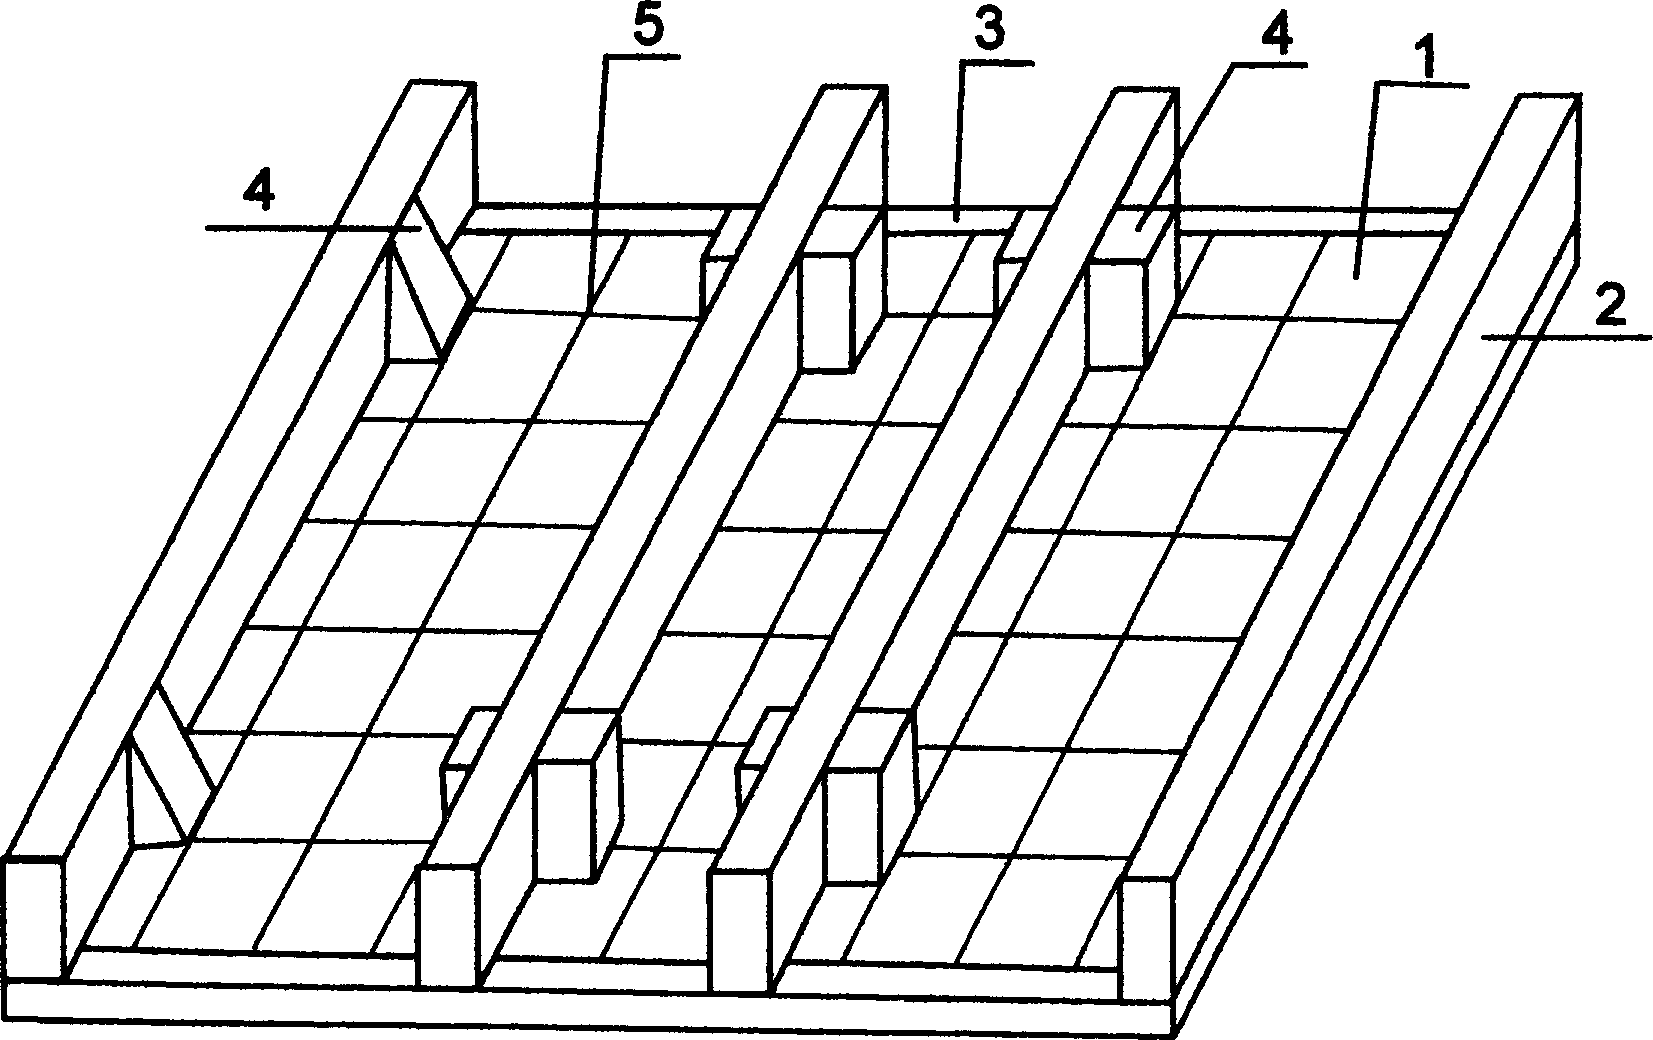 Foamed-material composite tray and reutilizing method for waste foamed material